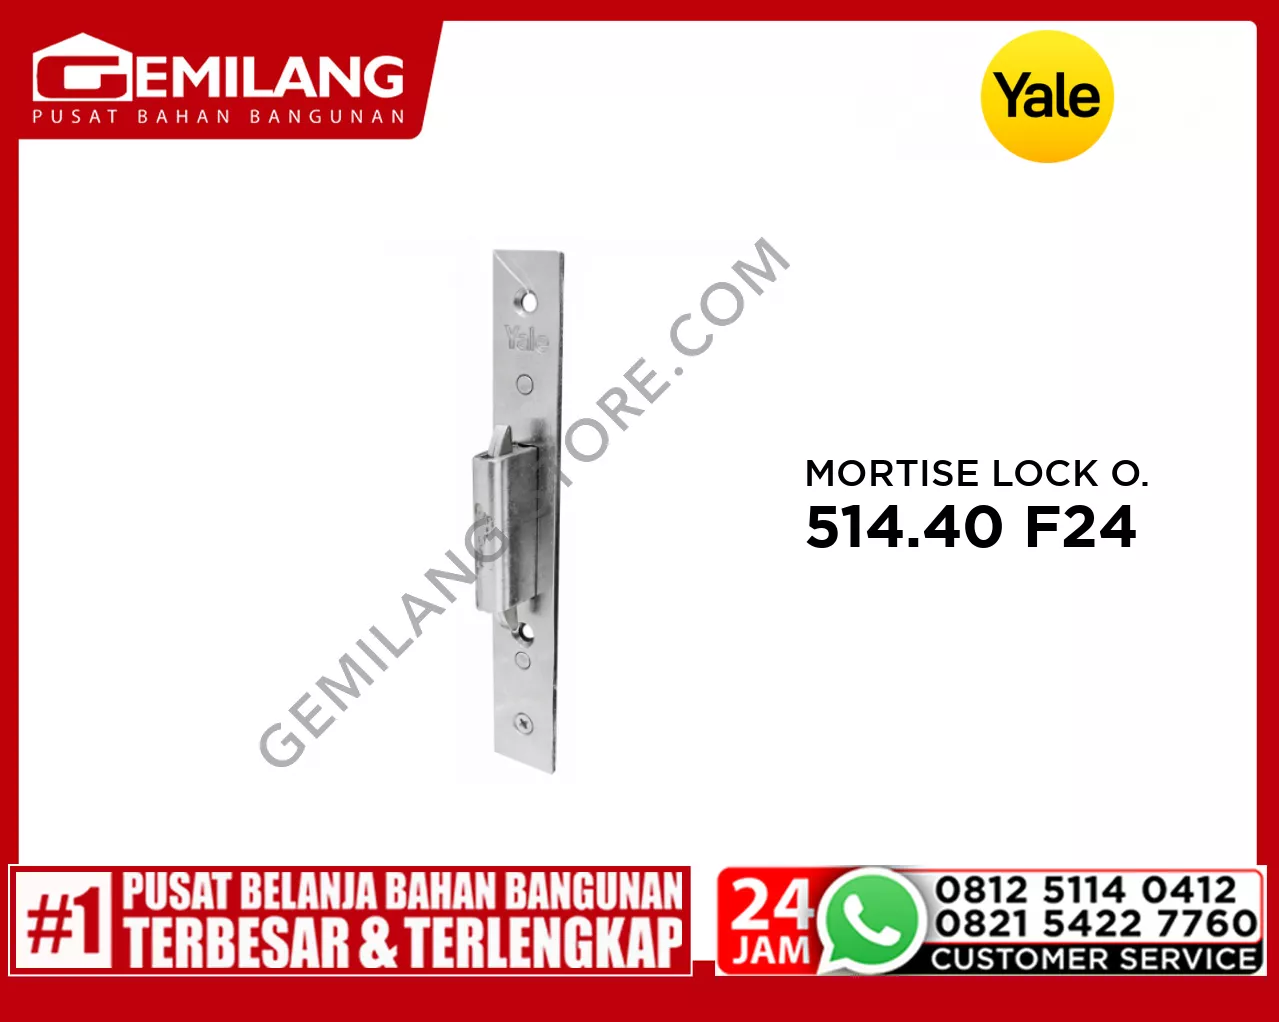 YALE MORTISE LOCK ONLY 514.40 F24